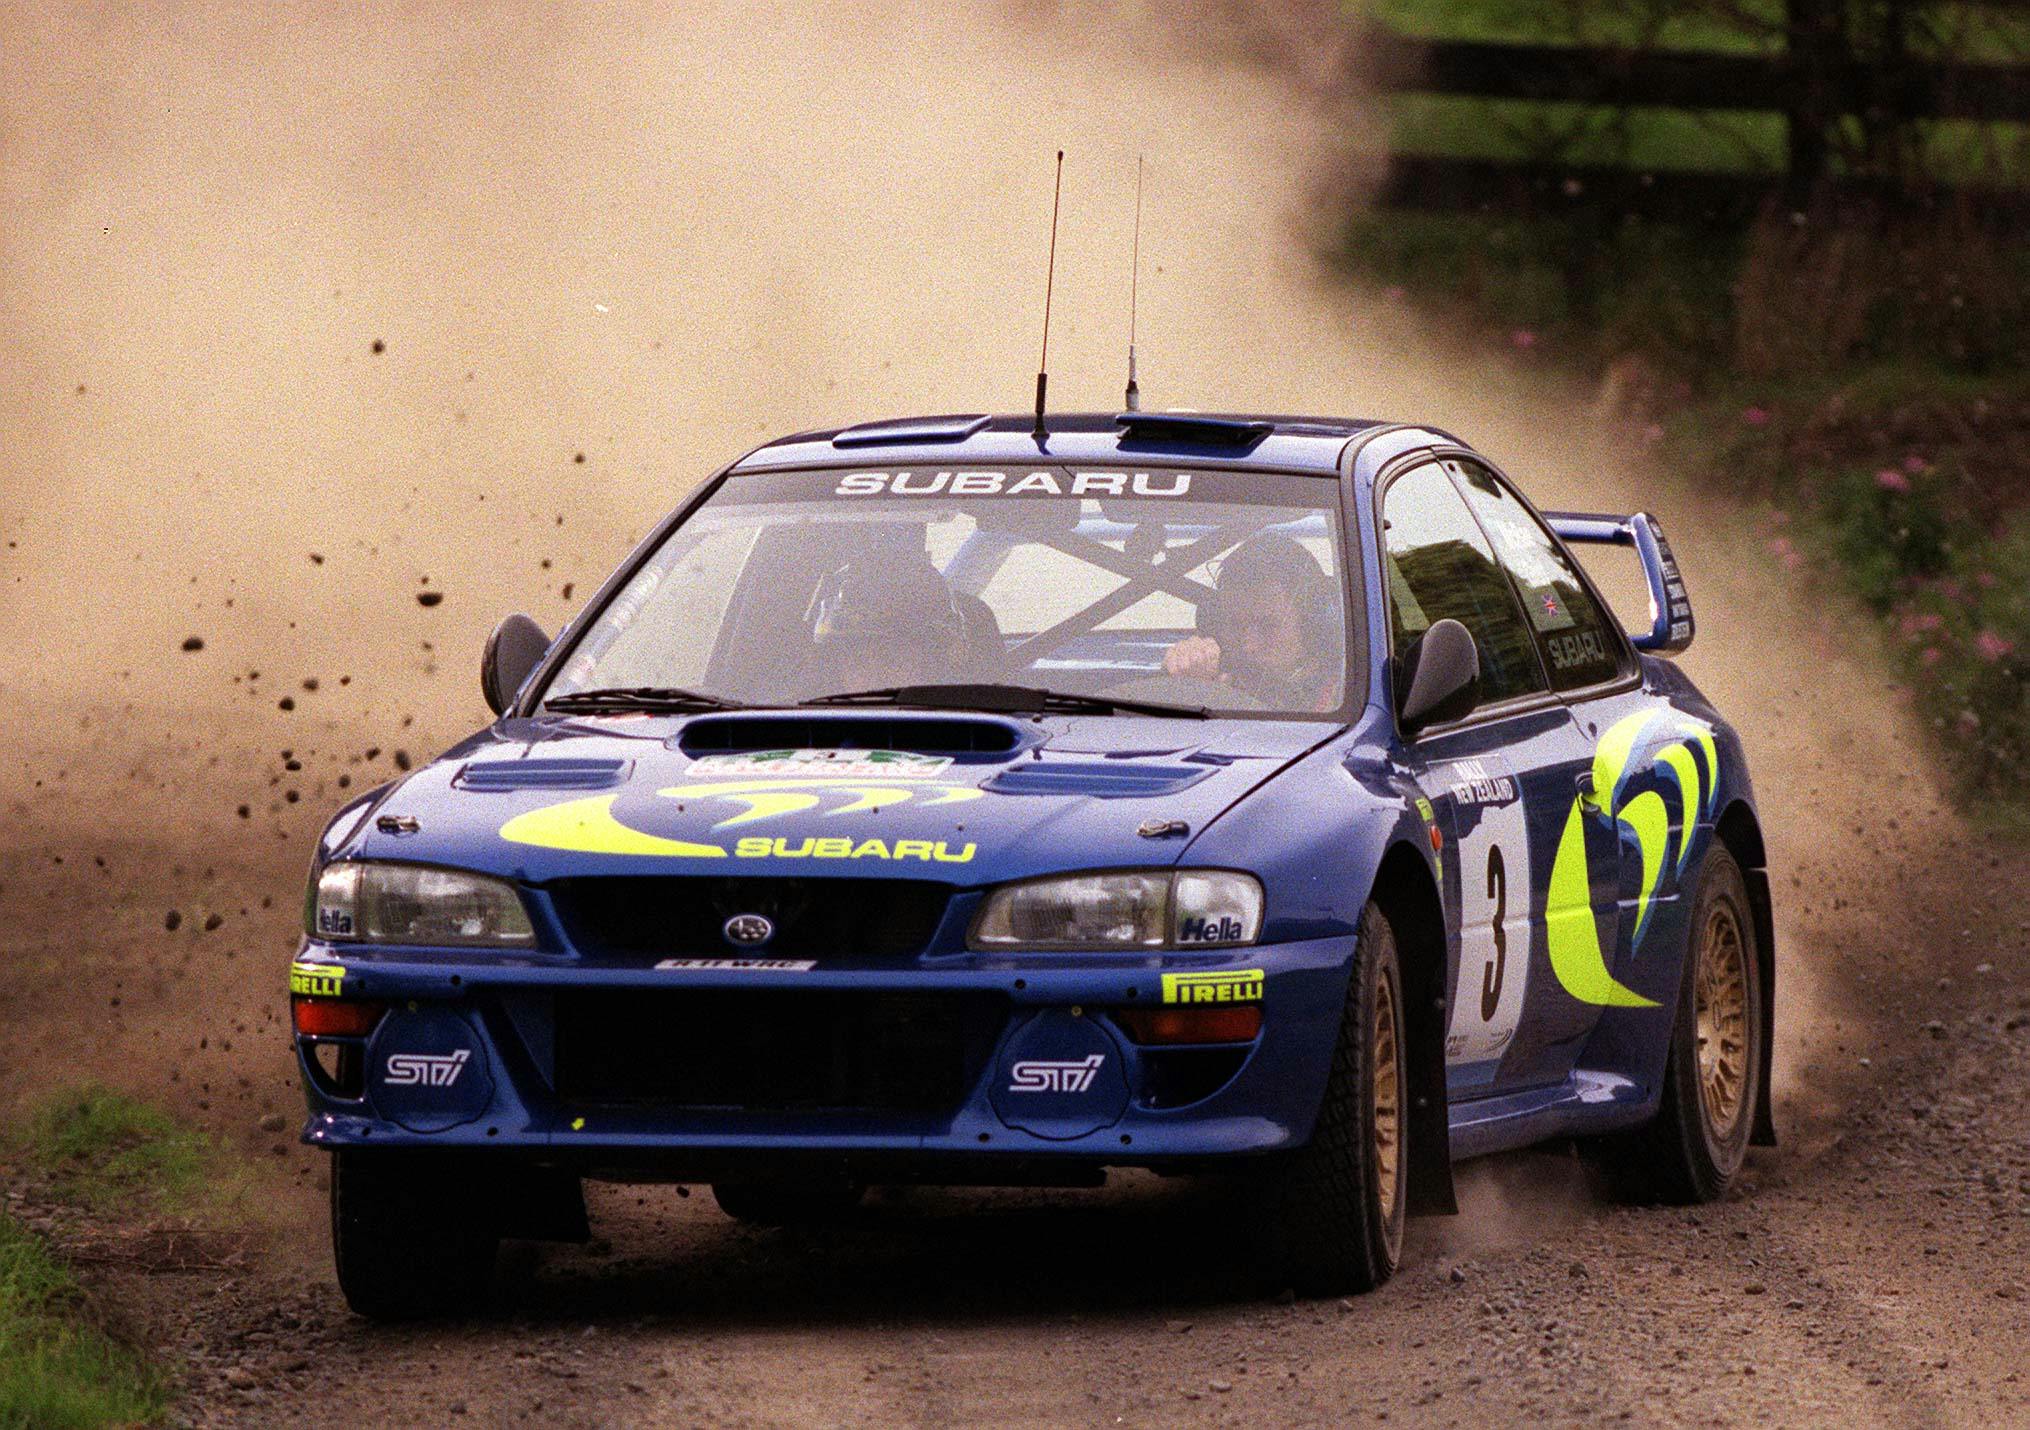 Toyota could power Subaru's return to WRC - Hagerty Media